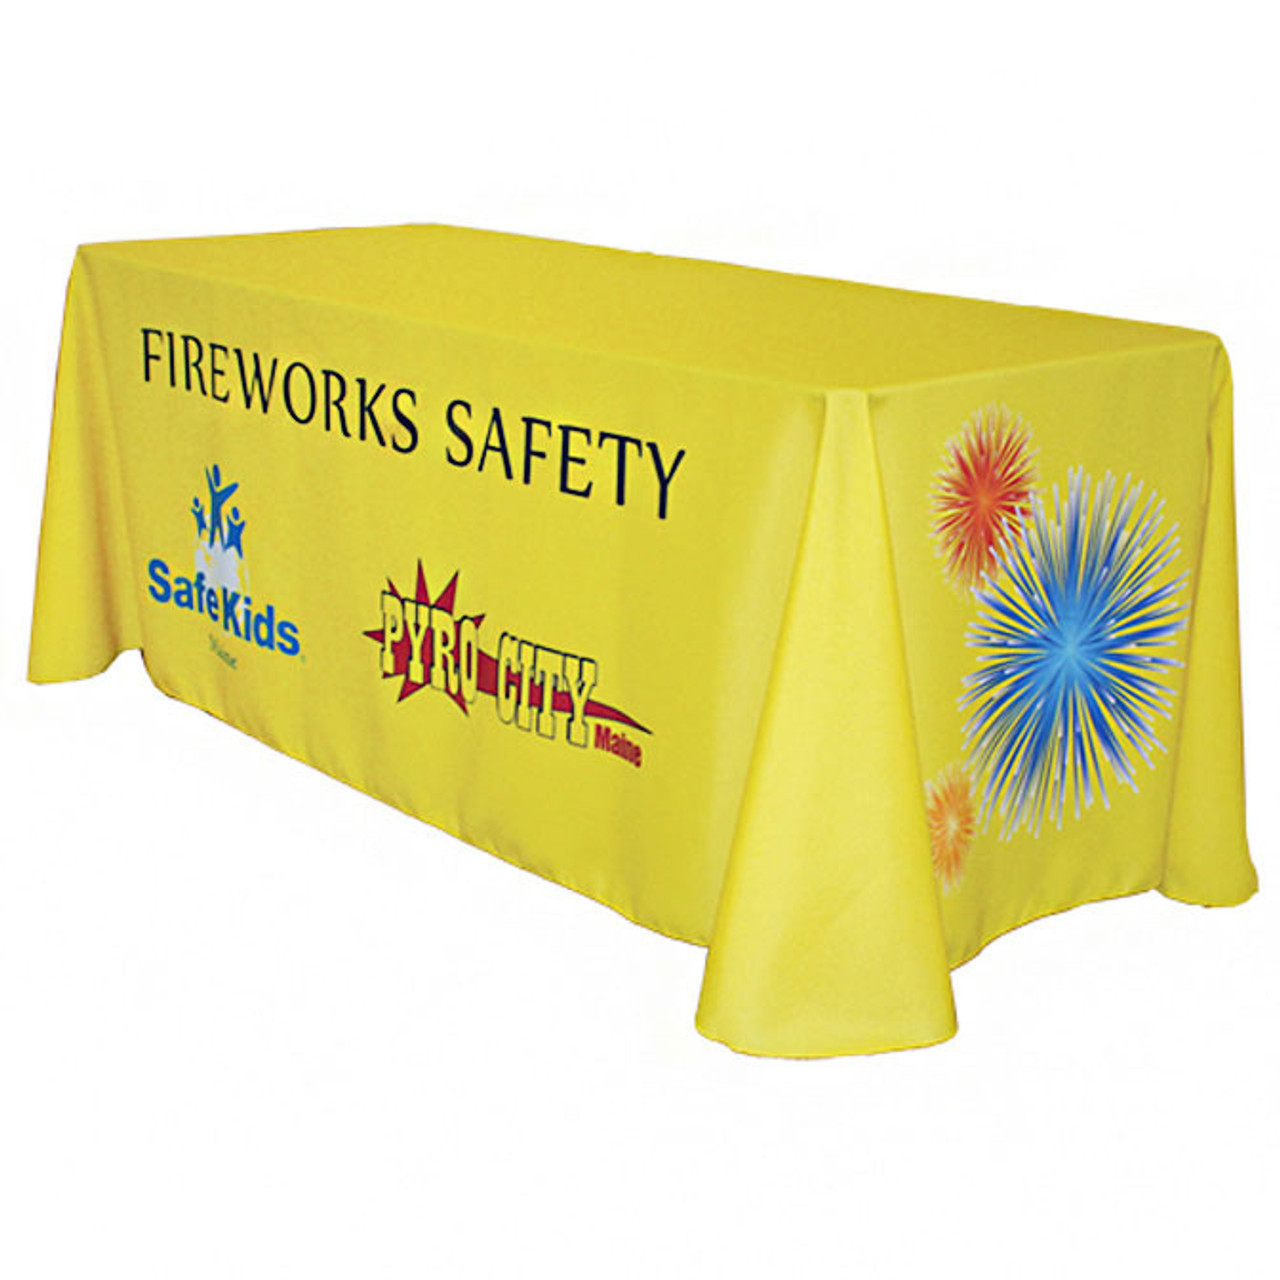 Fireworks safety custom printed draped 6' table cover.